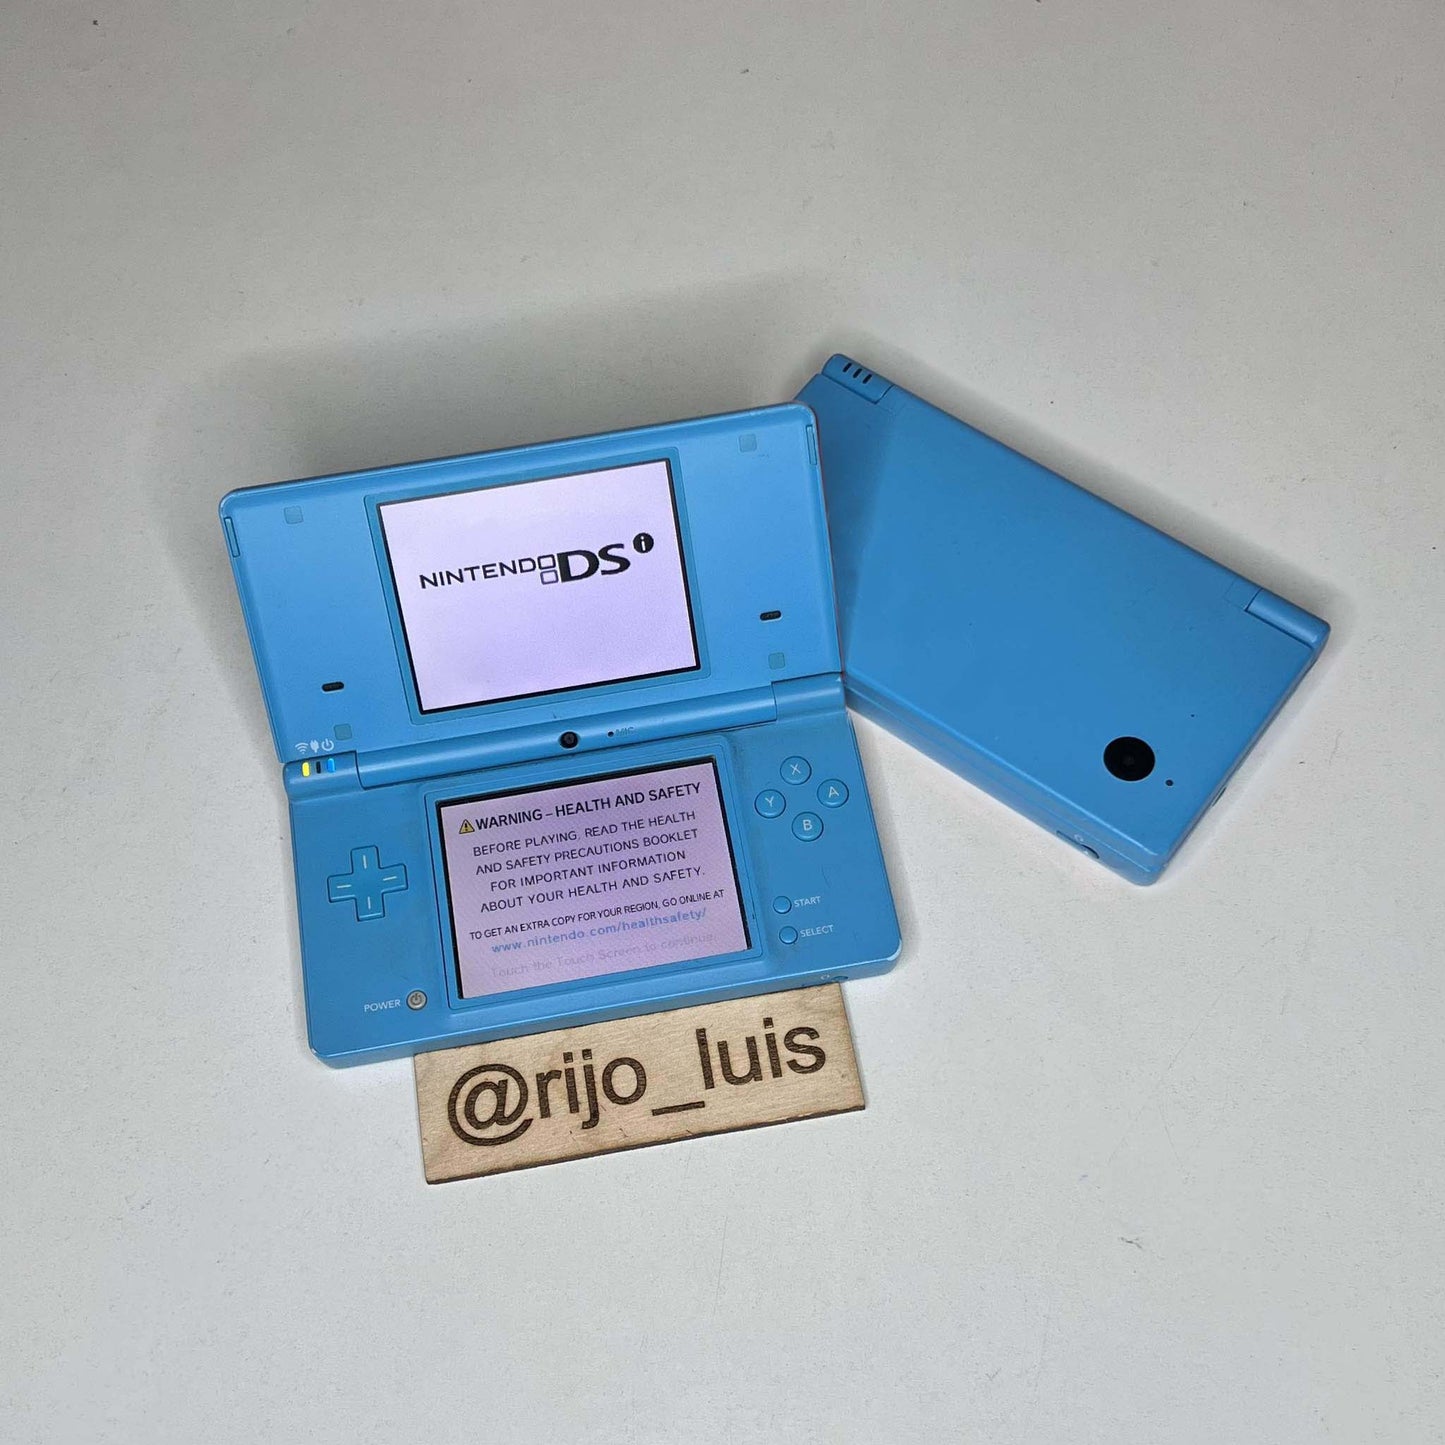 Nintendo DSi with Games